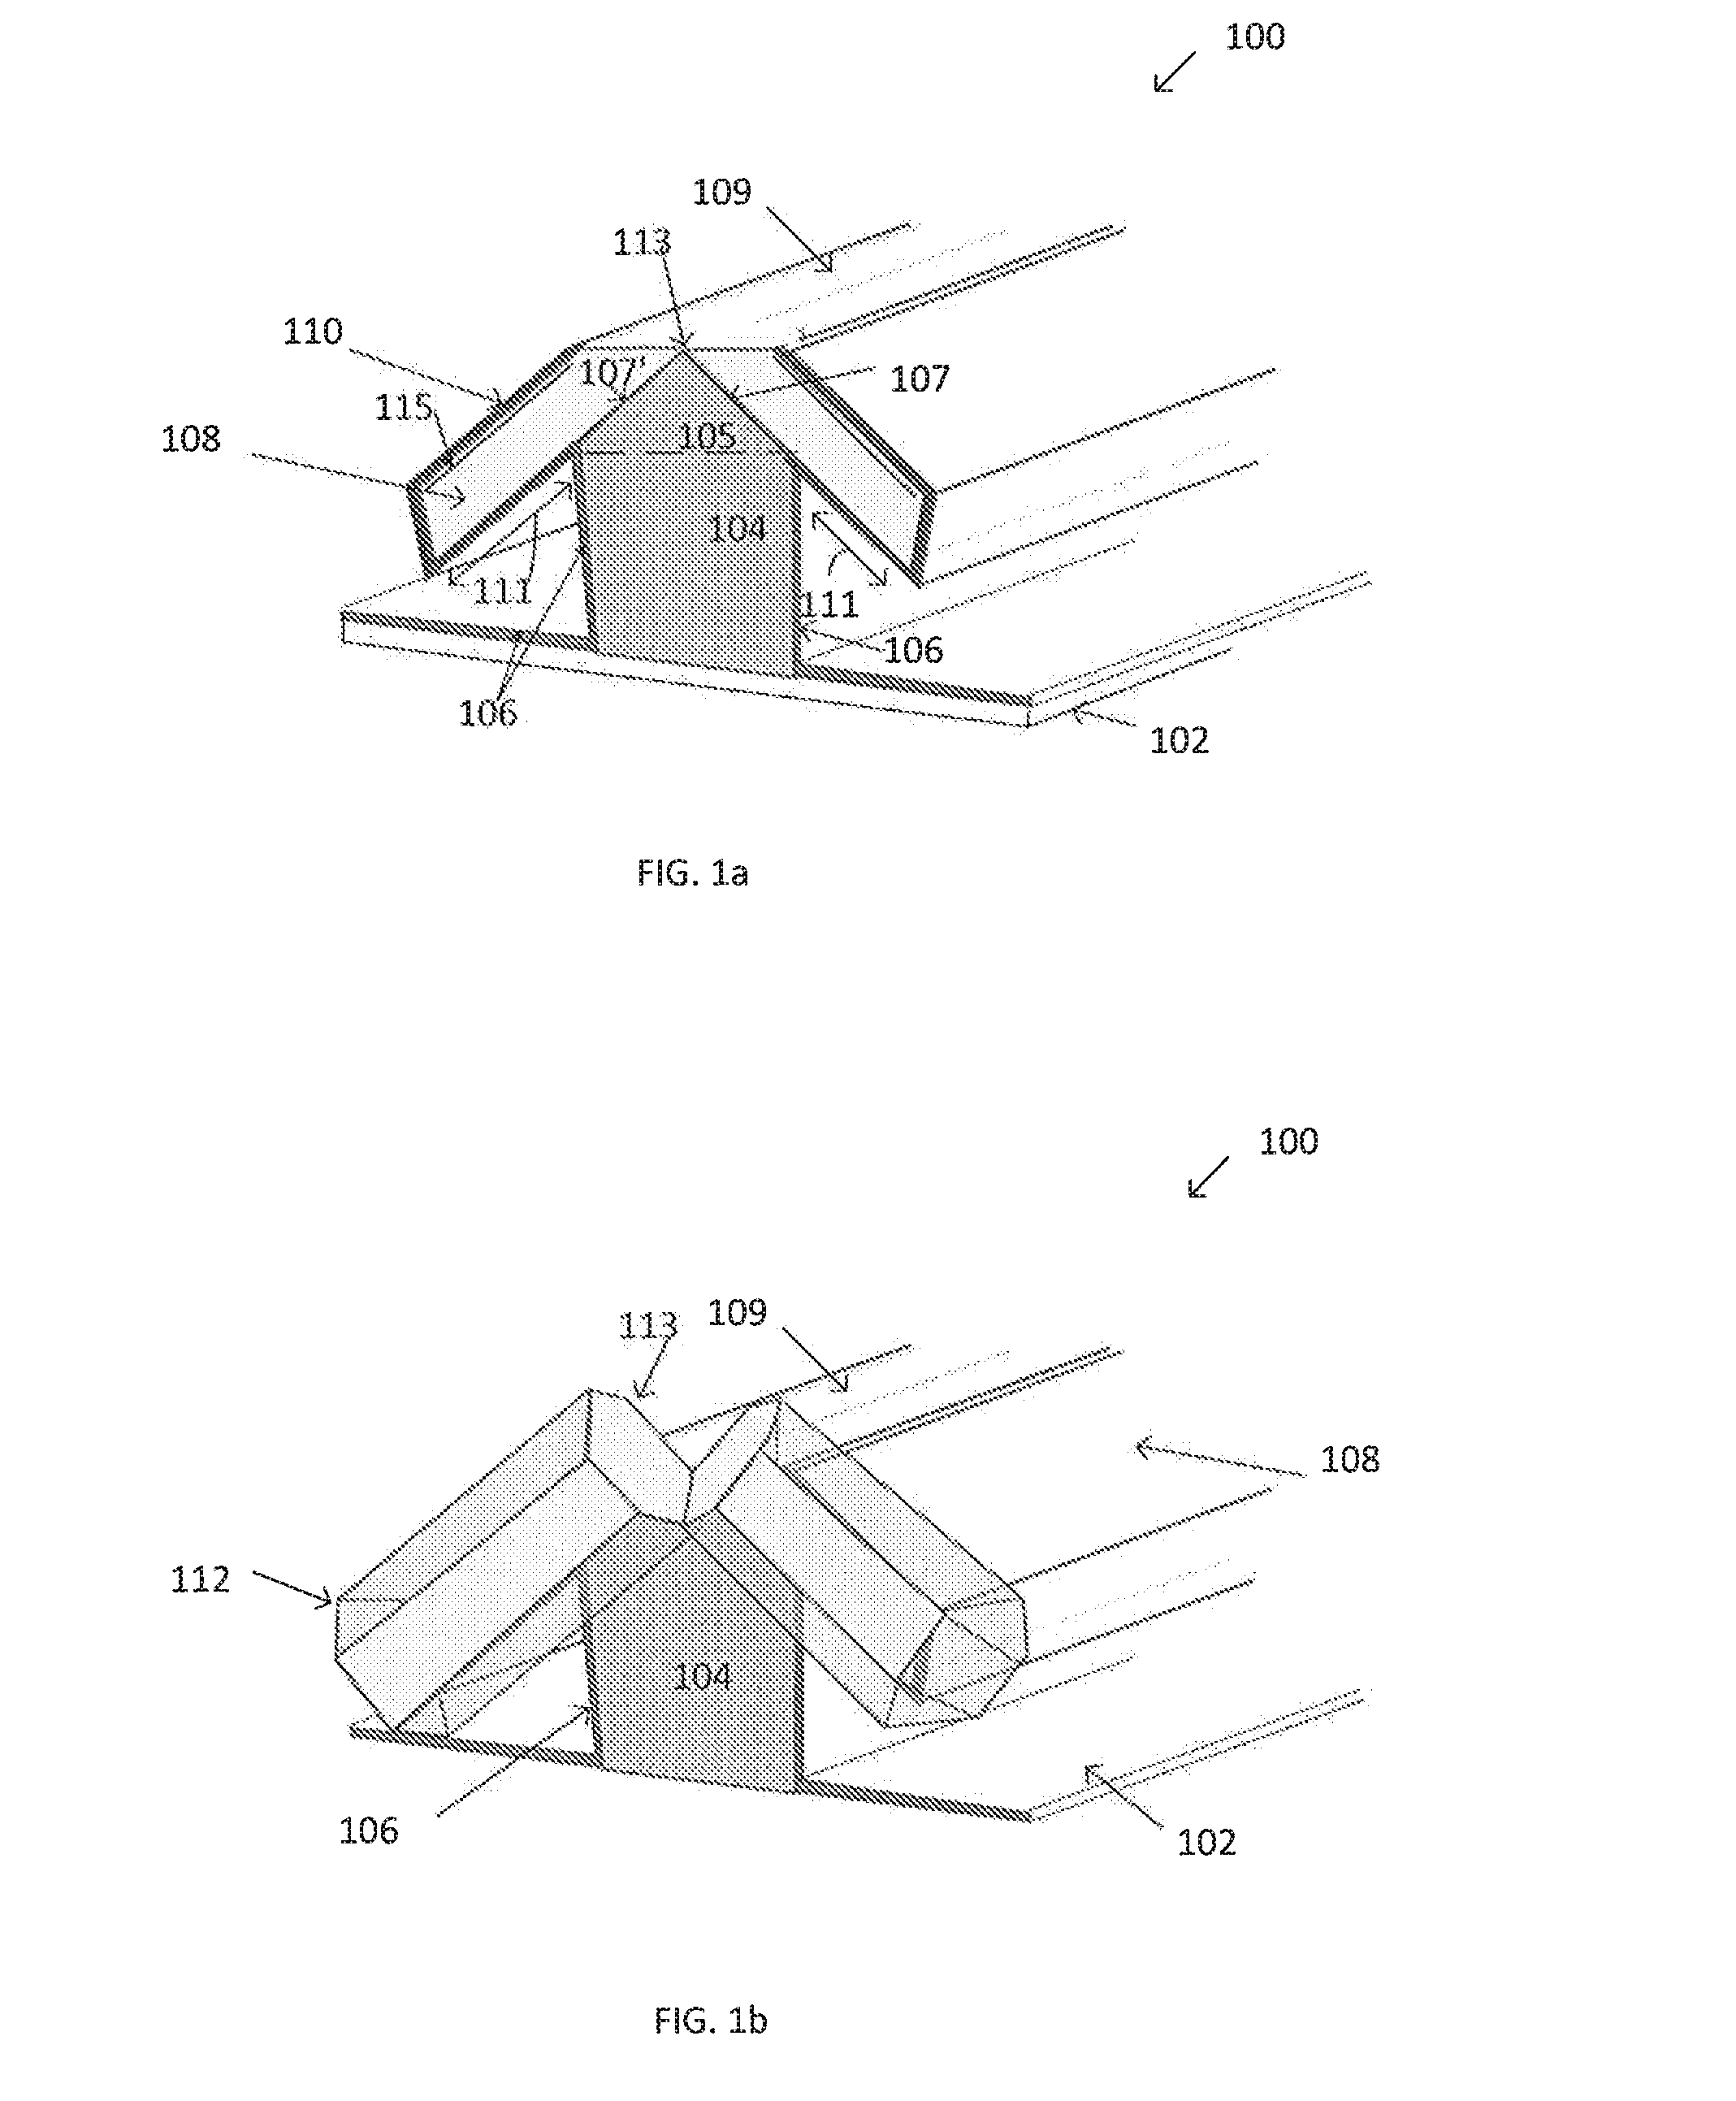 Forming iii-v device structures on (111) planes of silicon fins